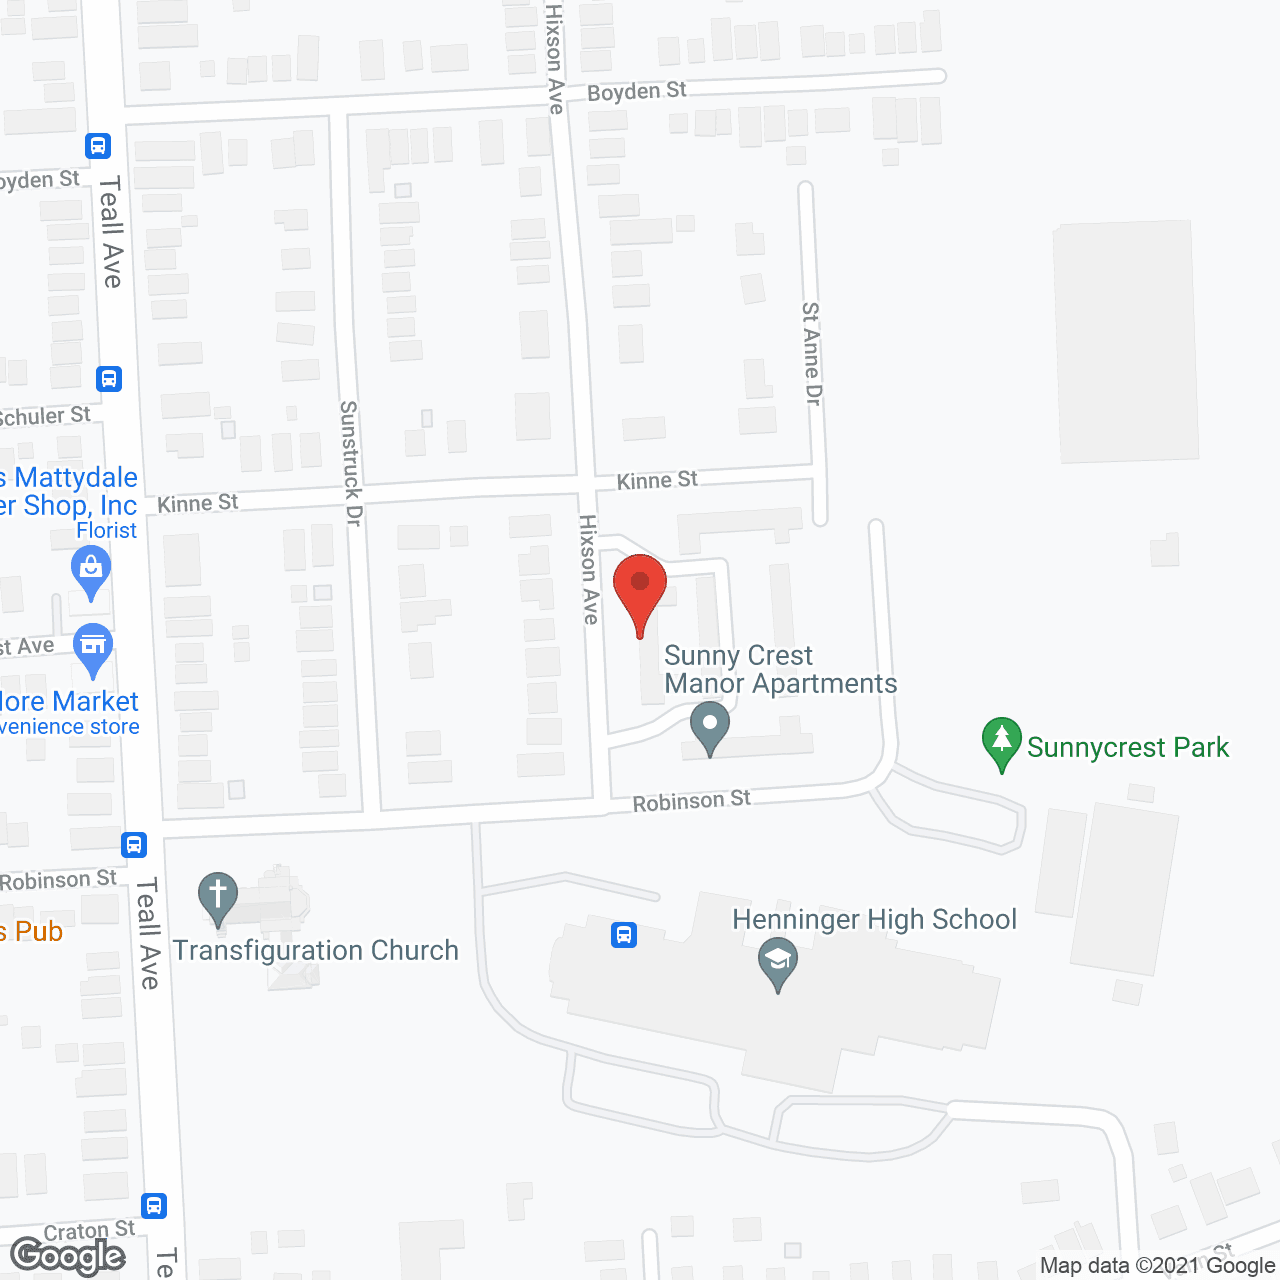 Sunny Crest Apartments in google map